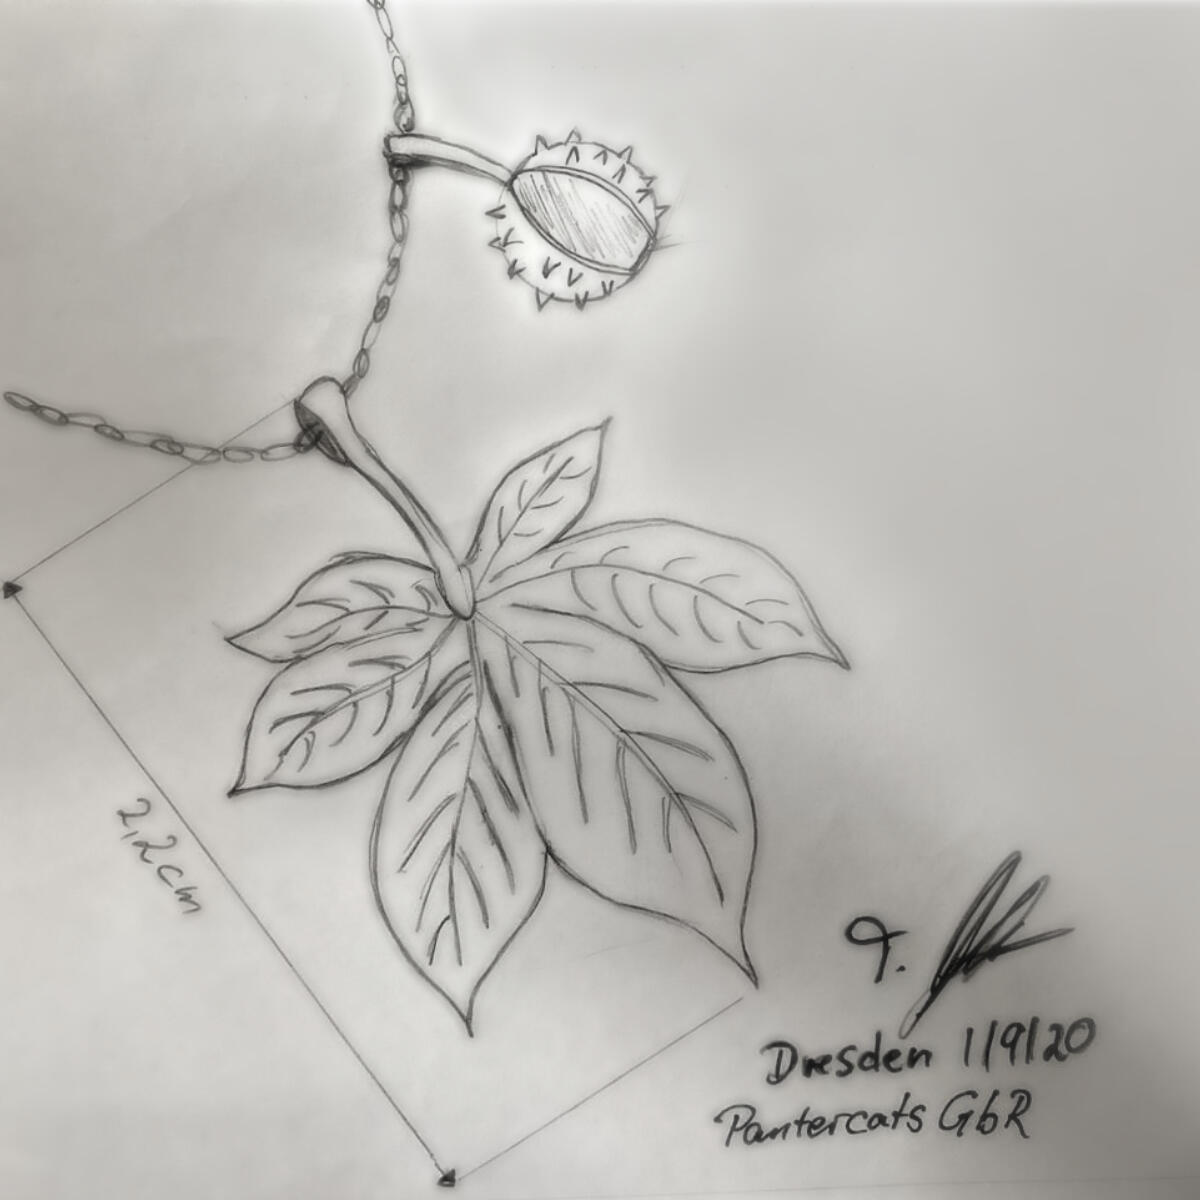 In this image, a captivating design of a chestnut, artfully drawn by Tomas, co-owner of Pantercats, is showcased. The design is transformed into an extraordinary necklace made from exquisite 925 silver. Inspired by the beauty of nature during a family outing, this artwork captures the essence of Pantercats.